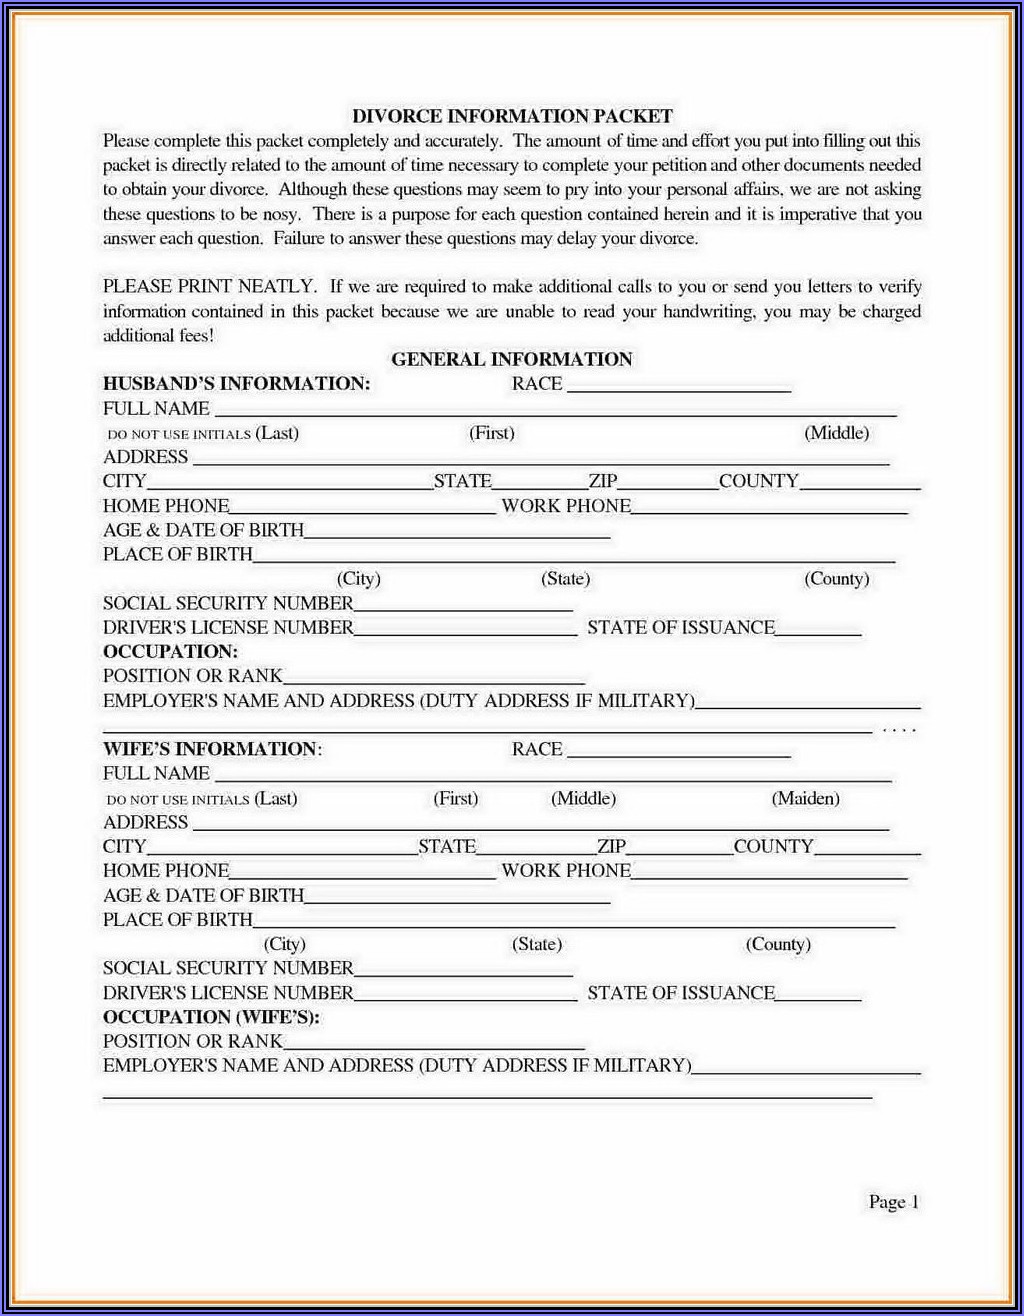 Forms To File For Divorce In Texas